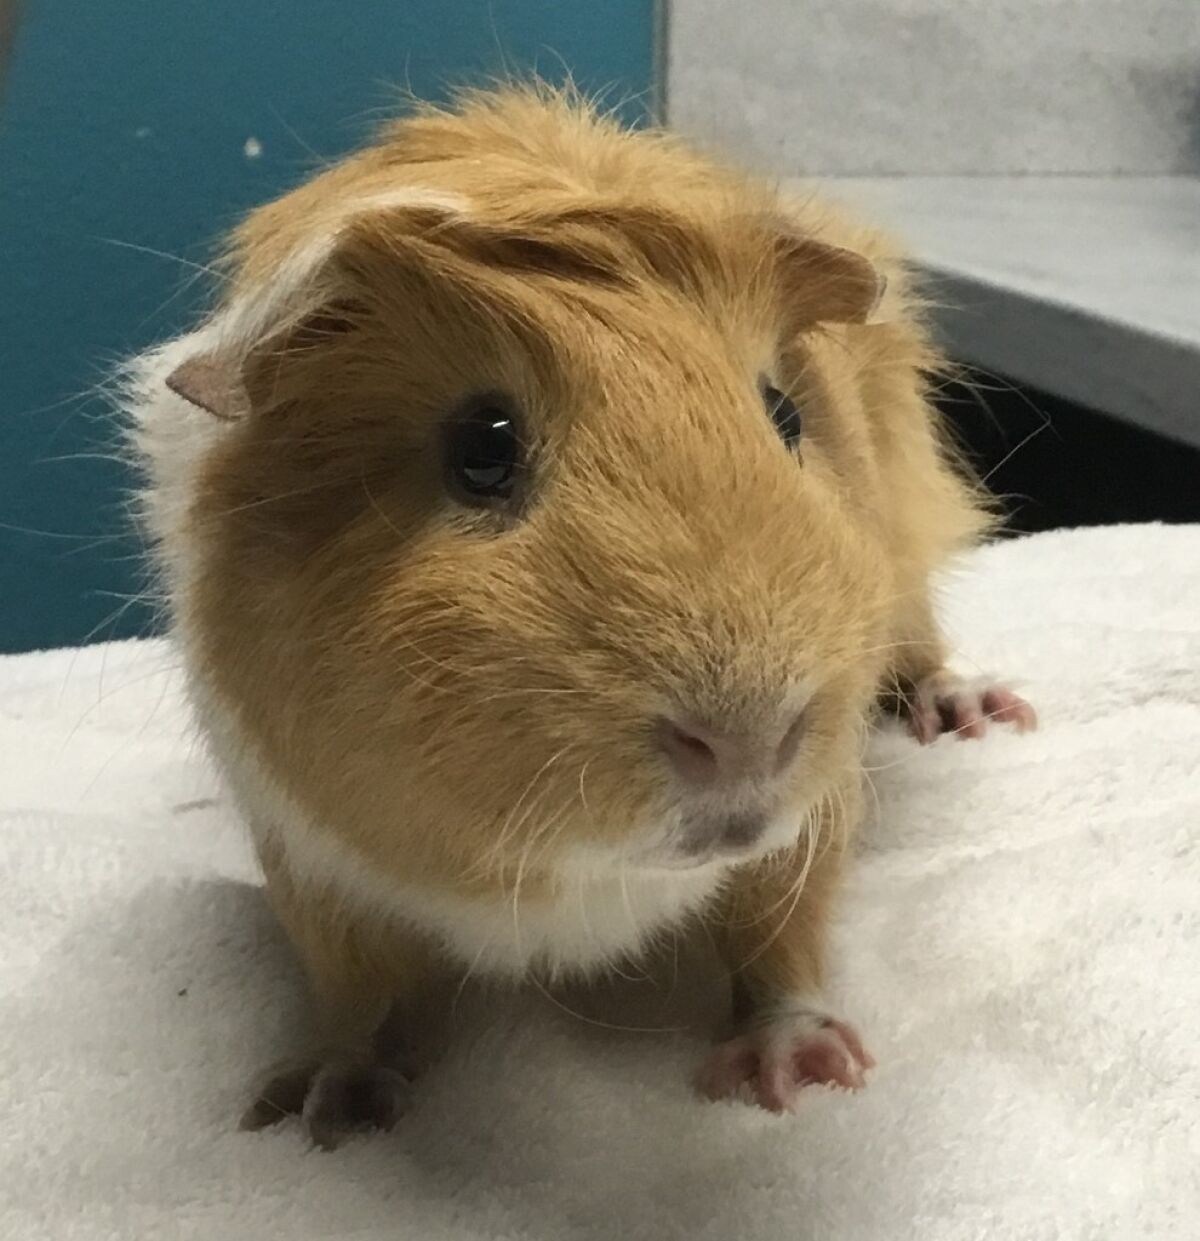 Pet of the week is a guinea pig